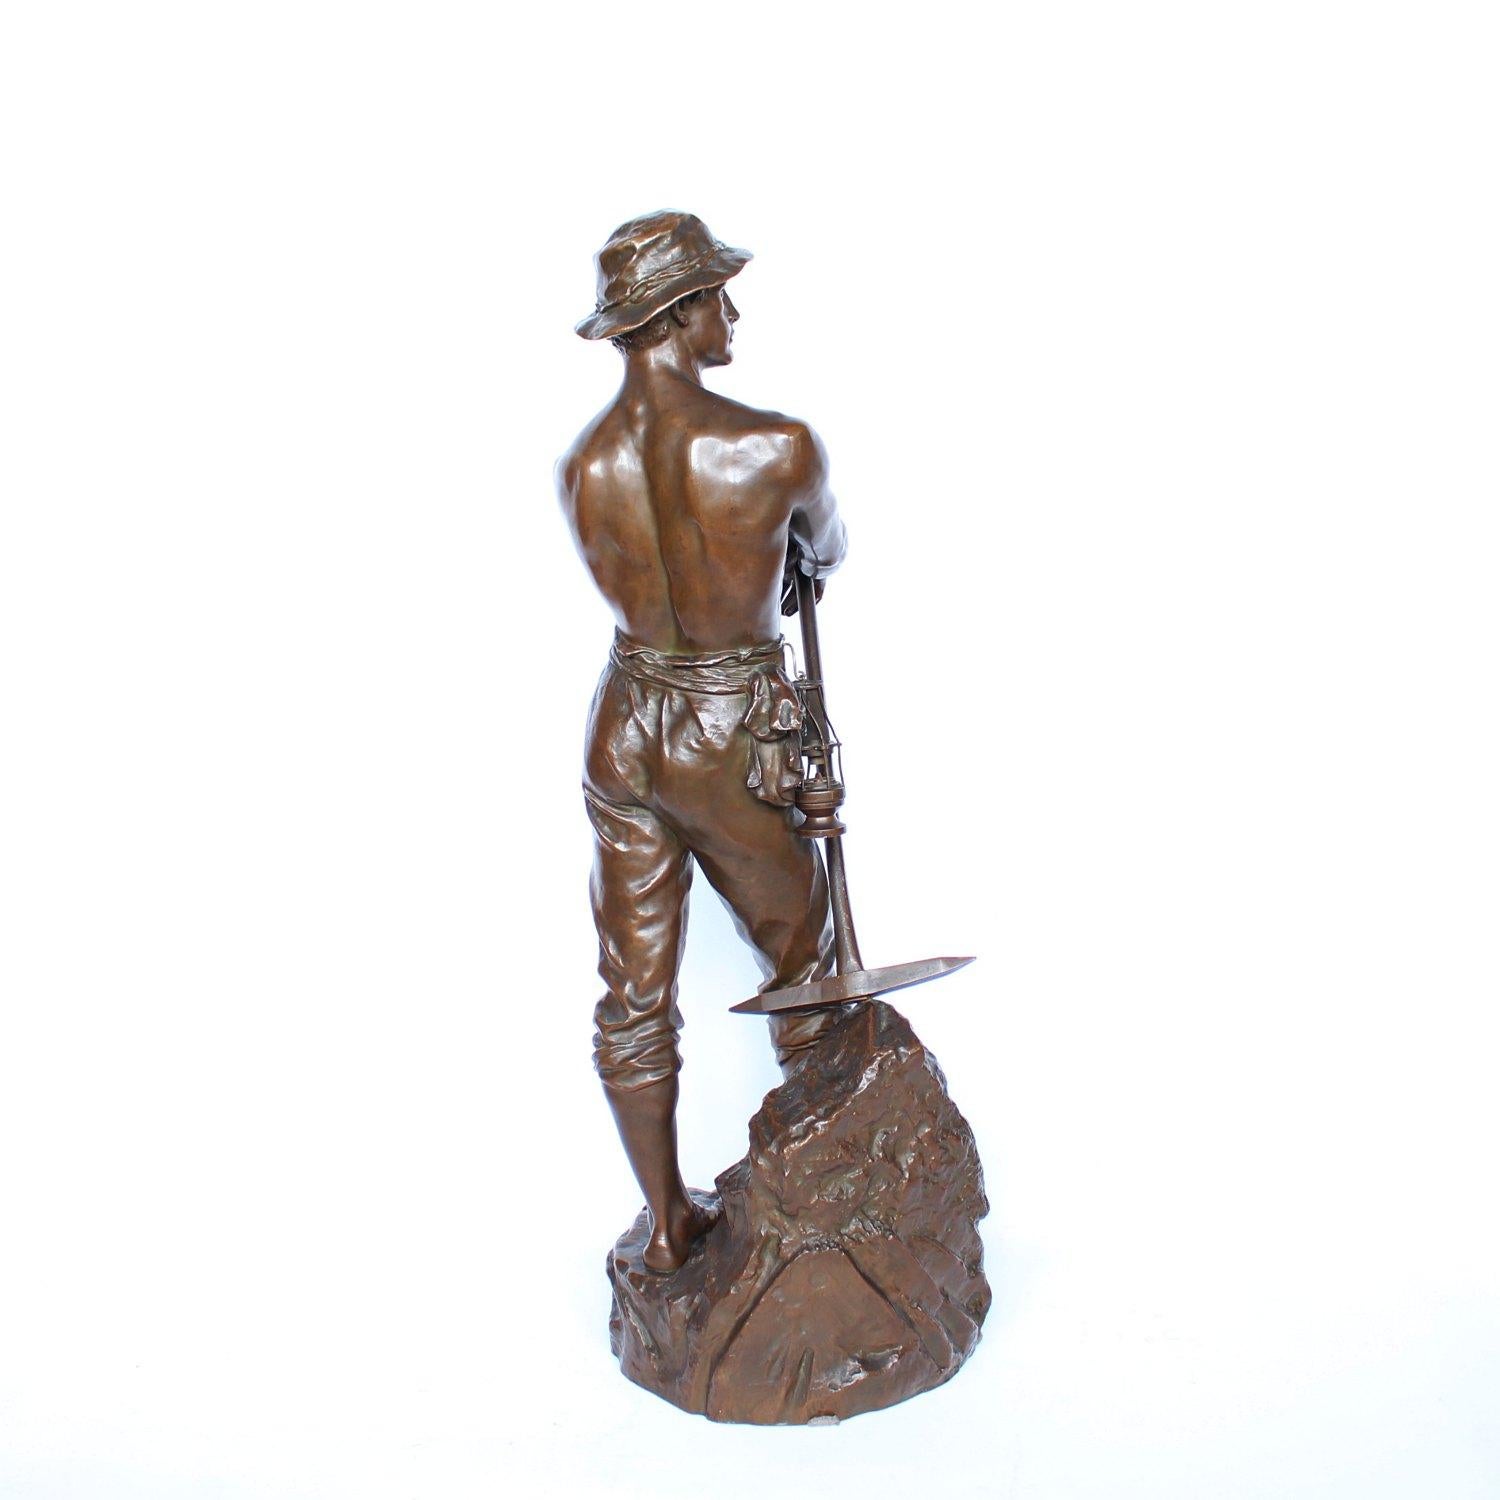 Polished 19th Century Large Bronze Sculpture of a Bare Chested Man, French, circa 1890